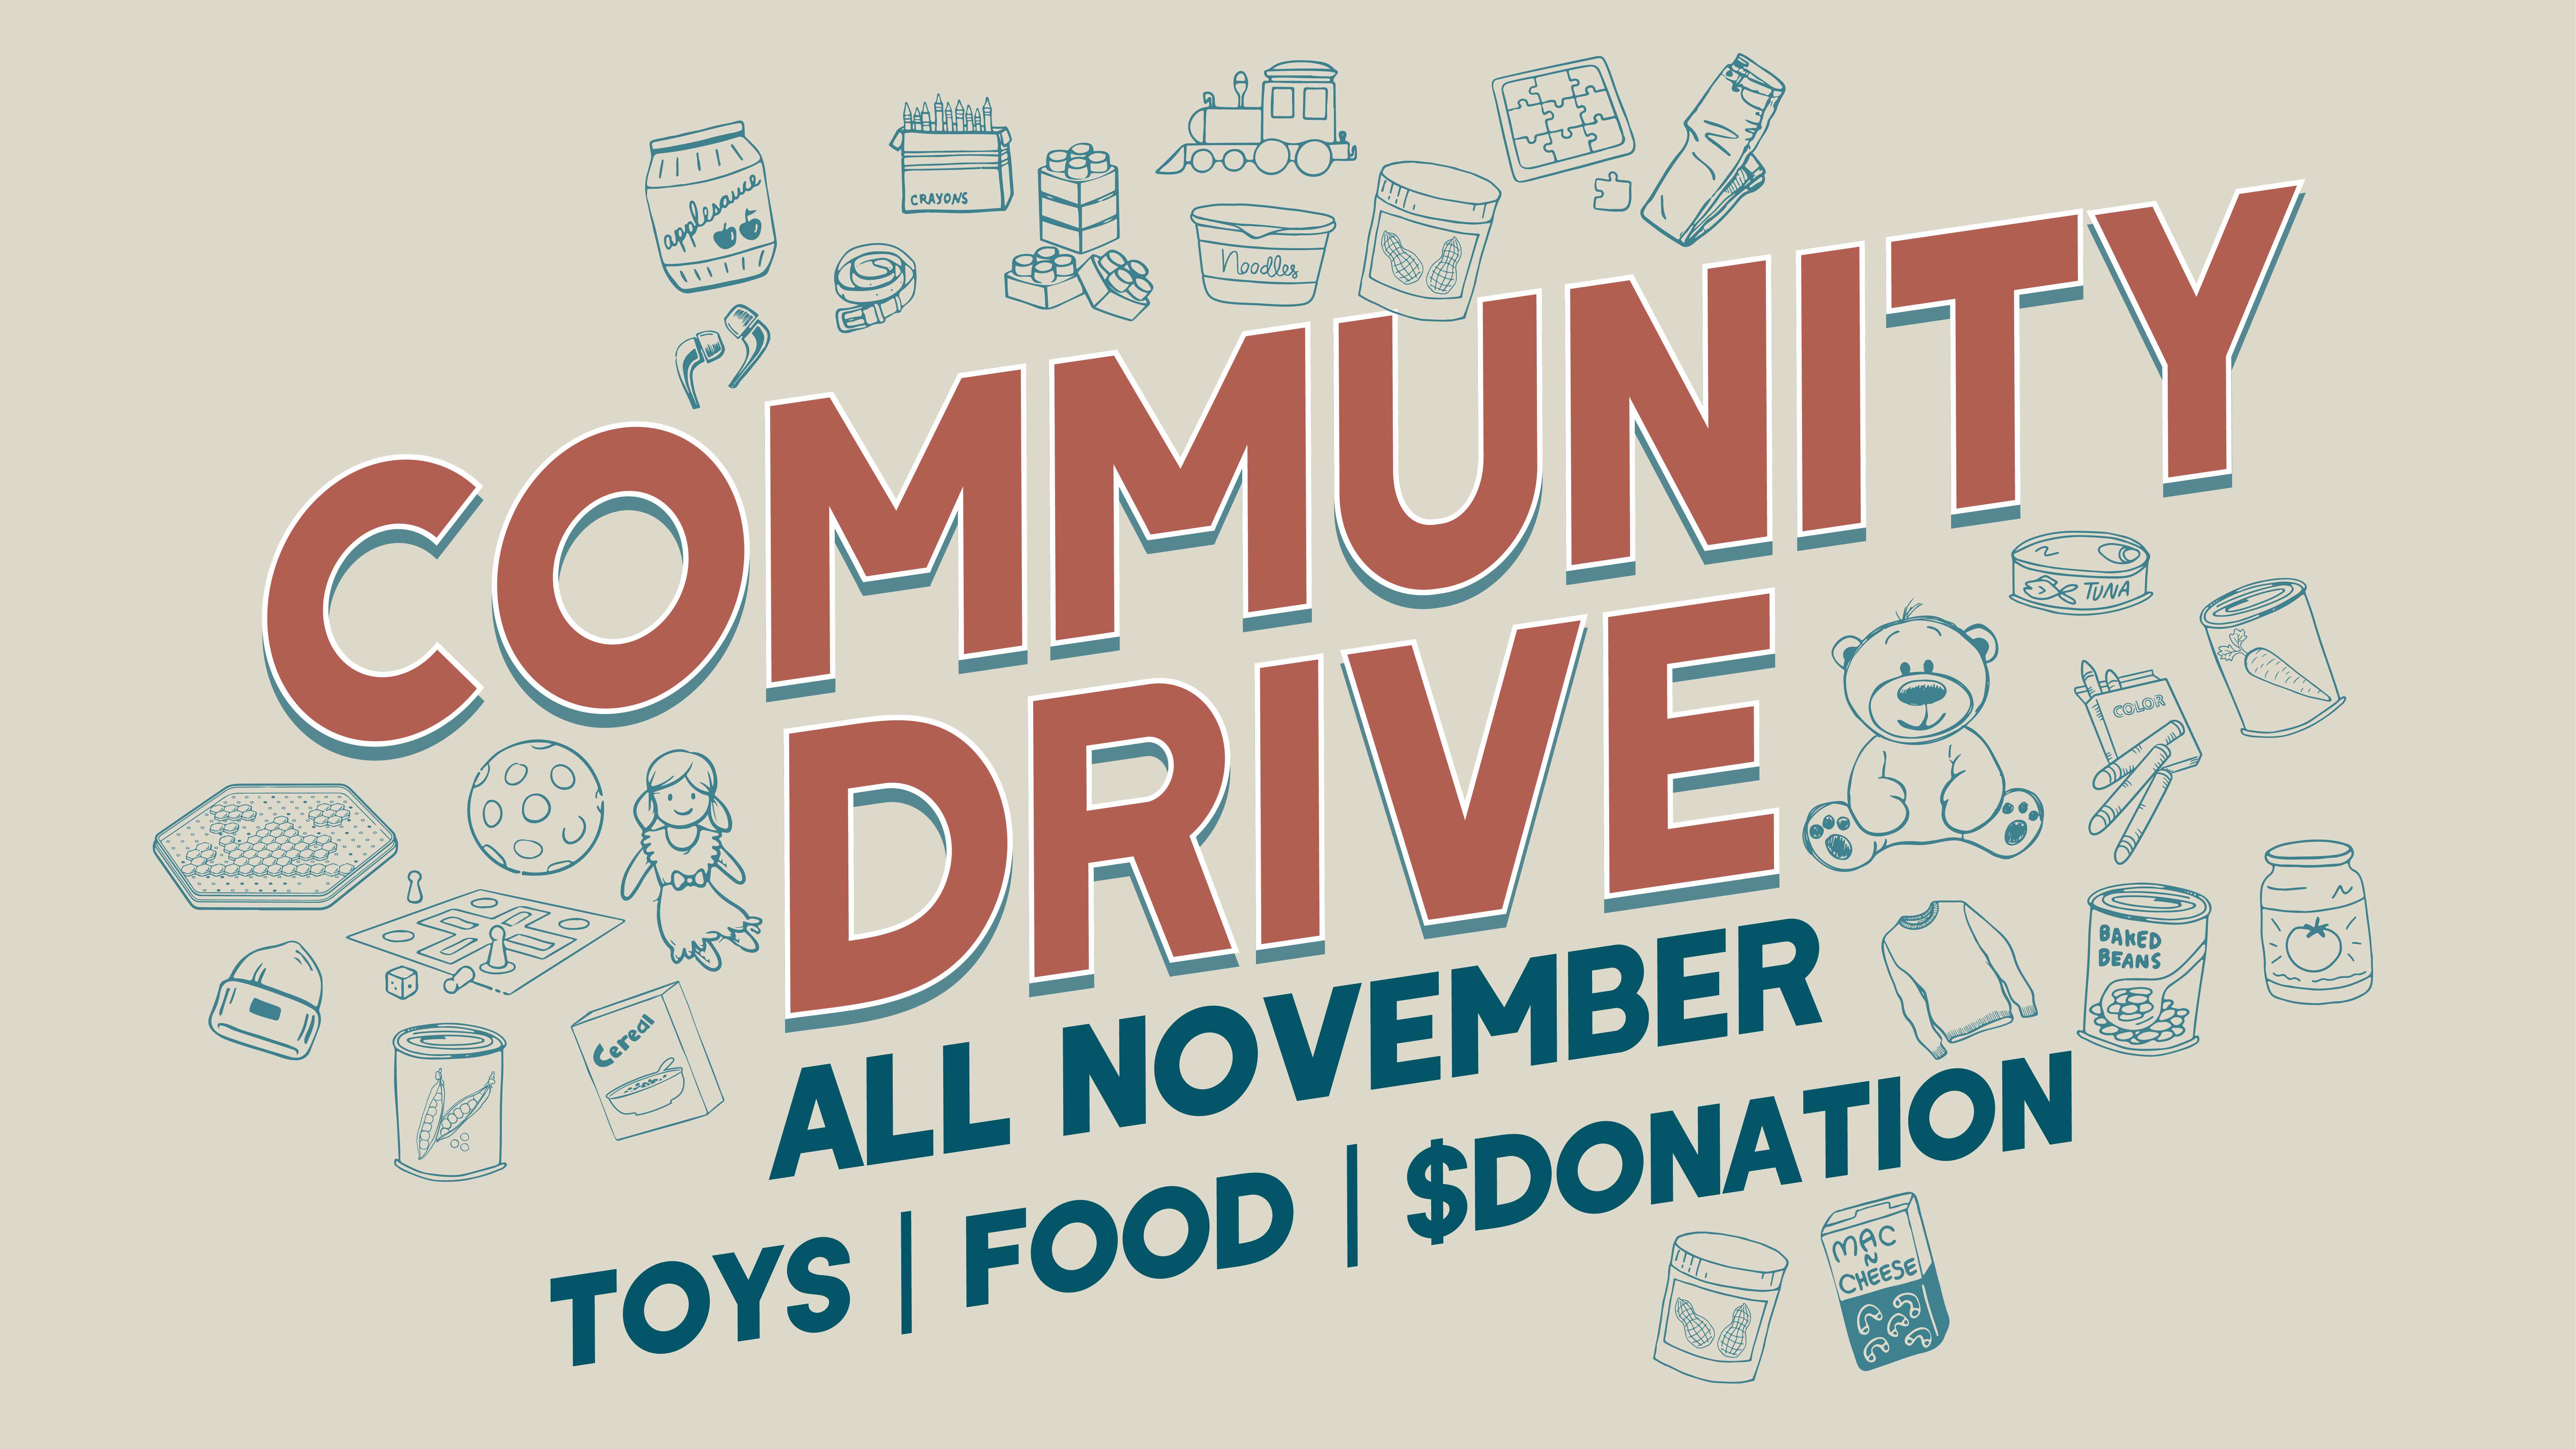 Image of Community Drive happening all of November. Toys and Food 